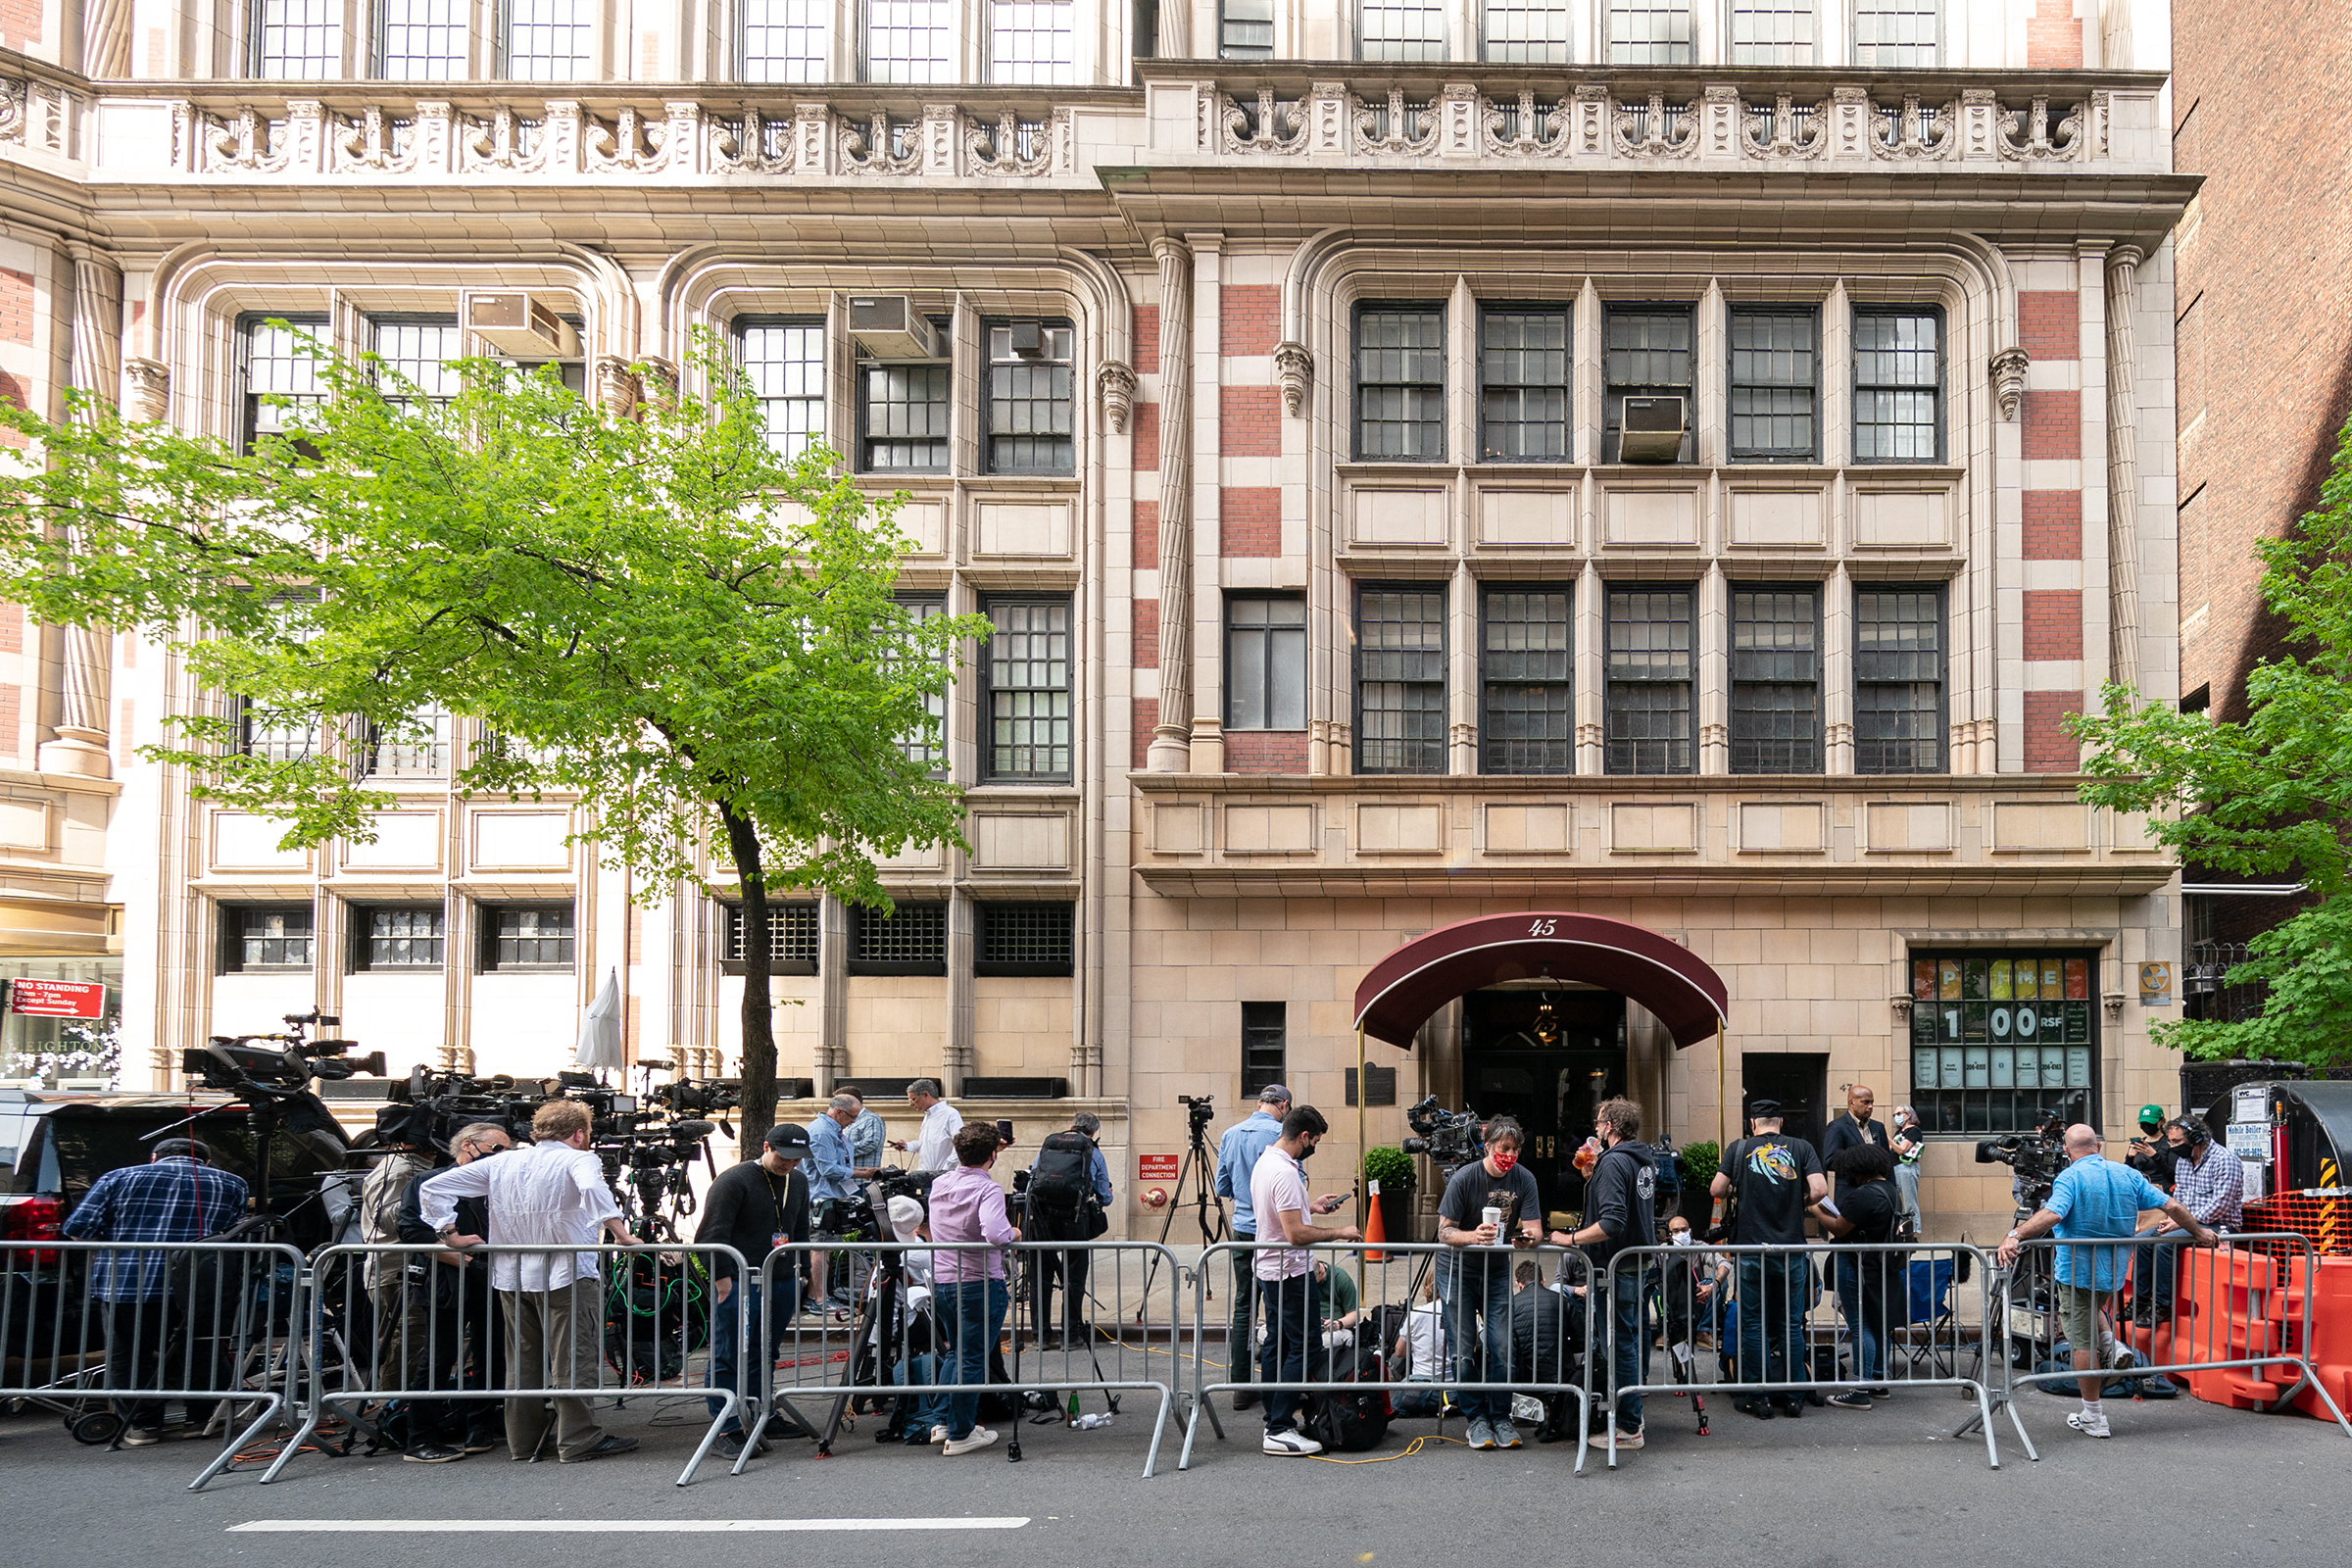 After the raid, members of the media gathered outside the apartment building of the home and office of Rudy Giuliani, the former New York City mayor and President Donald Trump's former personal lawyer, on April 28, 2021.